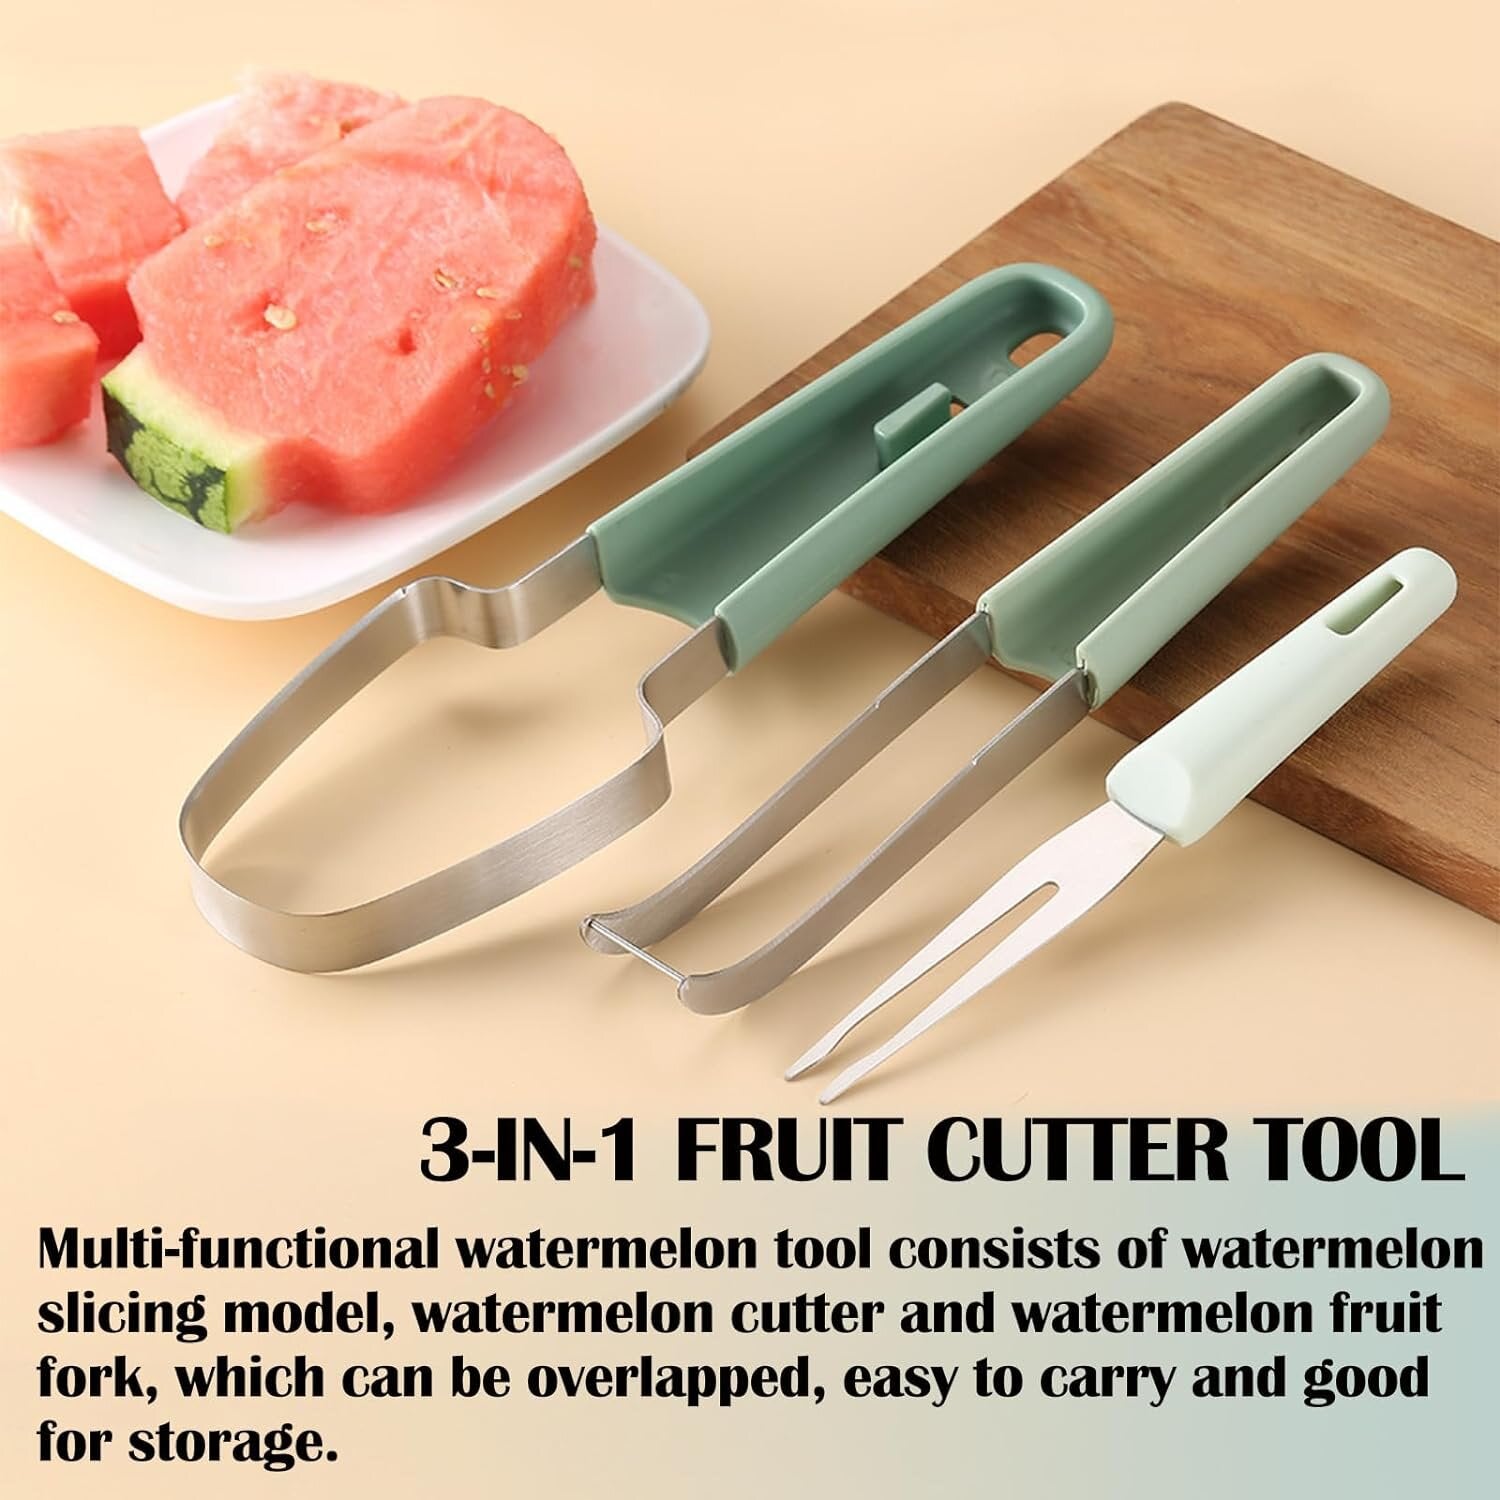 Fruit Cutting Tools: Our watermelon cutter slicer effortlessly slices through juicy watermelons, saving your fruit prep time and effort. Perfect for gathering, parties, and outdoor picnics, this cutting tool is a must-have for any fruit lover.